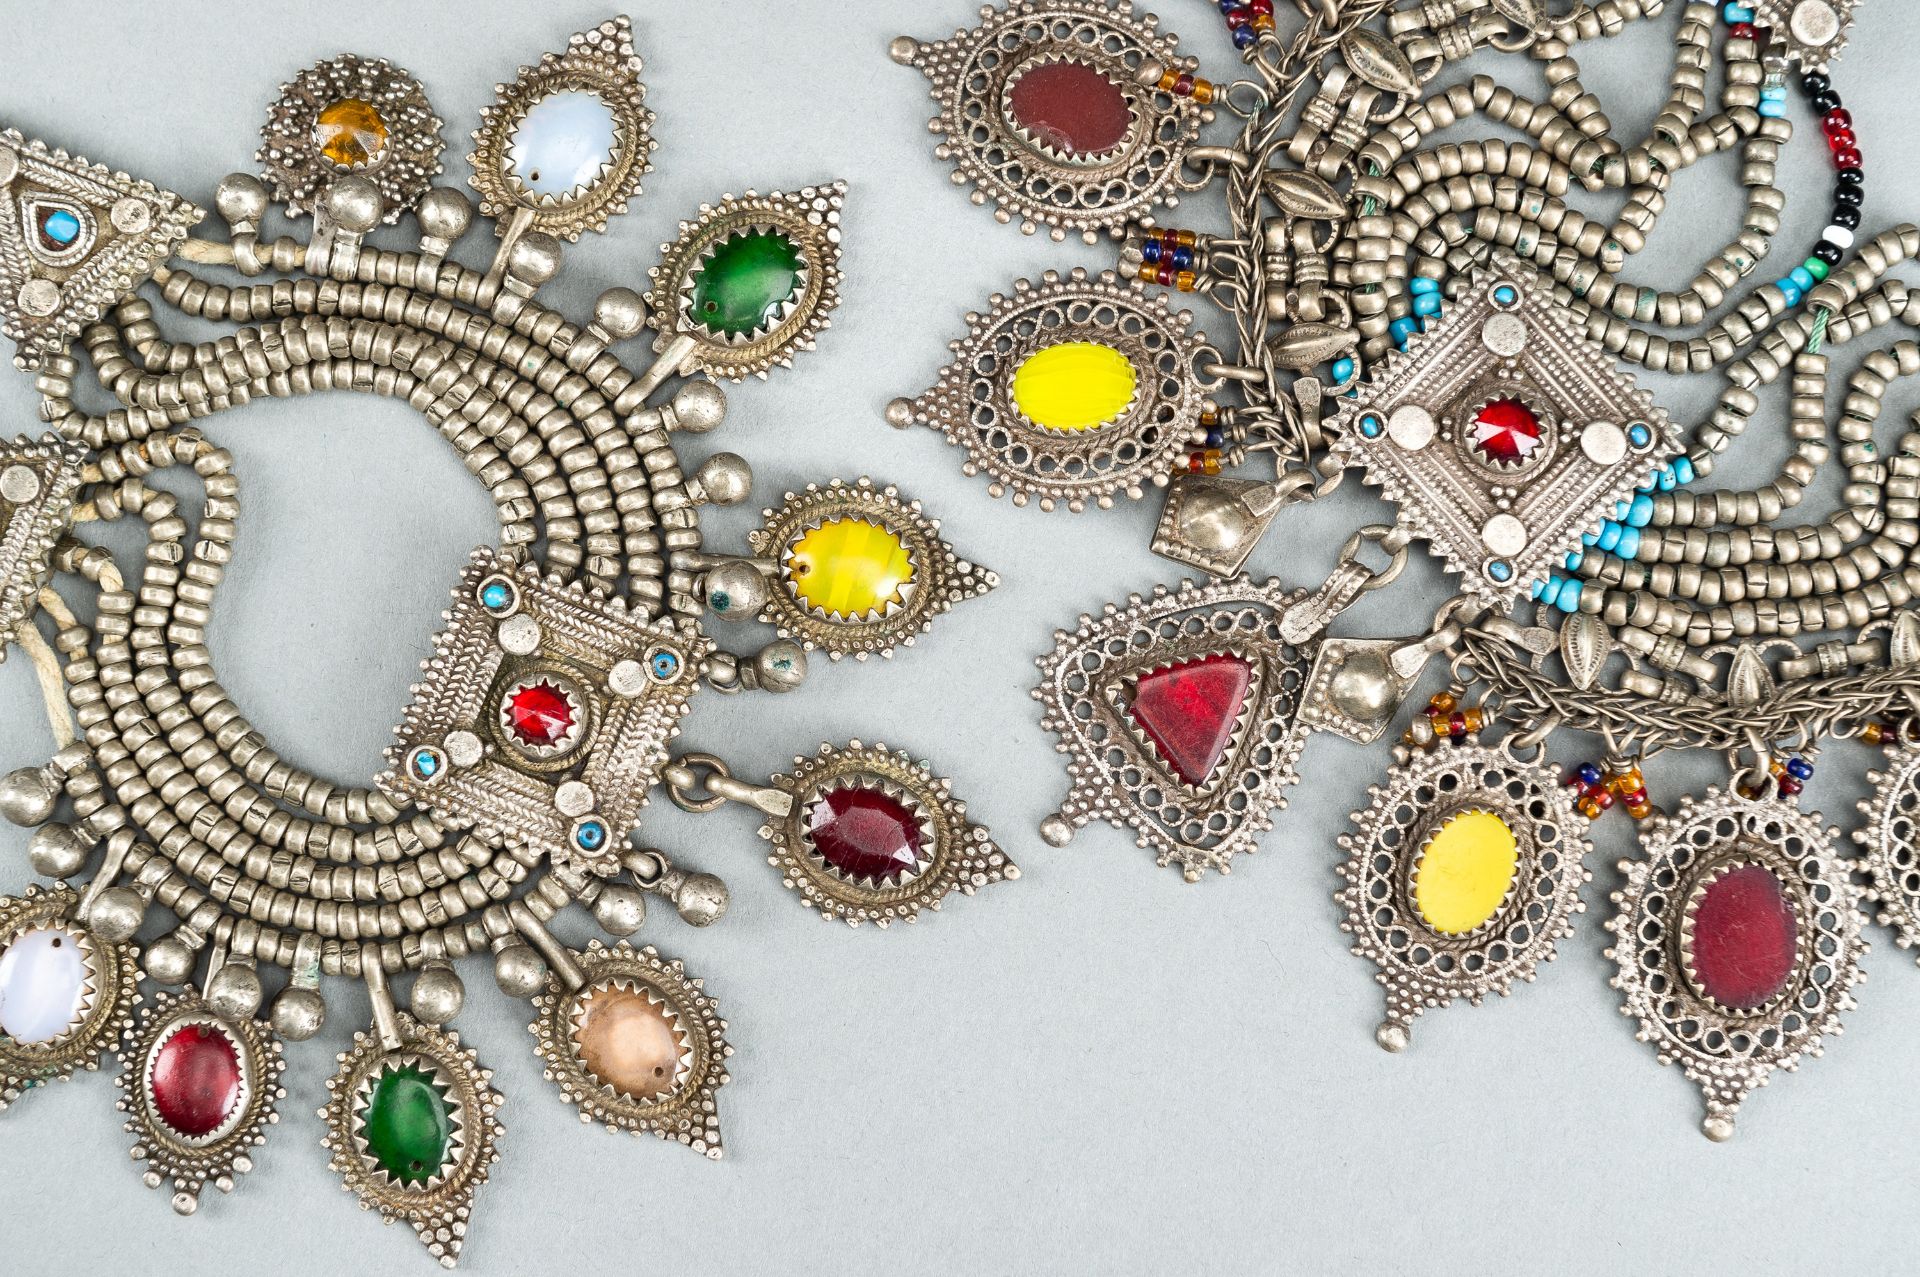 TWO TRIBAL AFGHAN MULTI-COLORED GLASS AND METAL NECKLACES, c. 1950s - Bild 3 aus 15